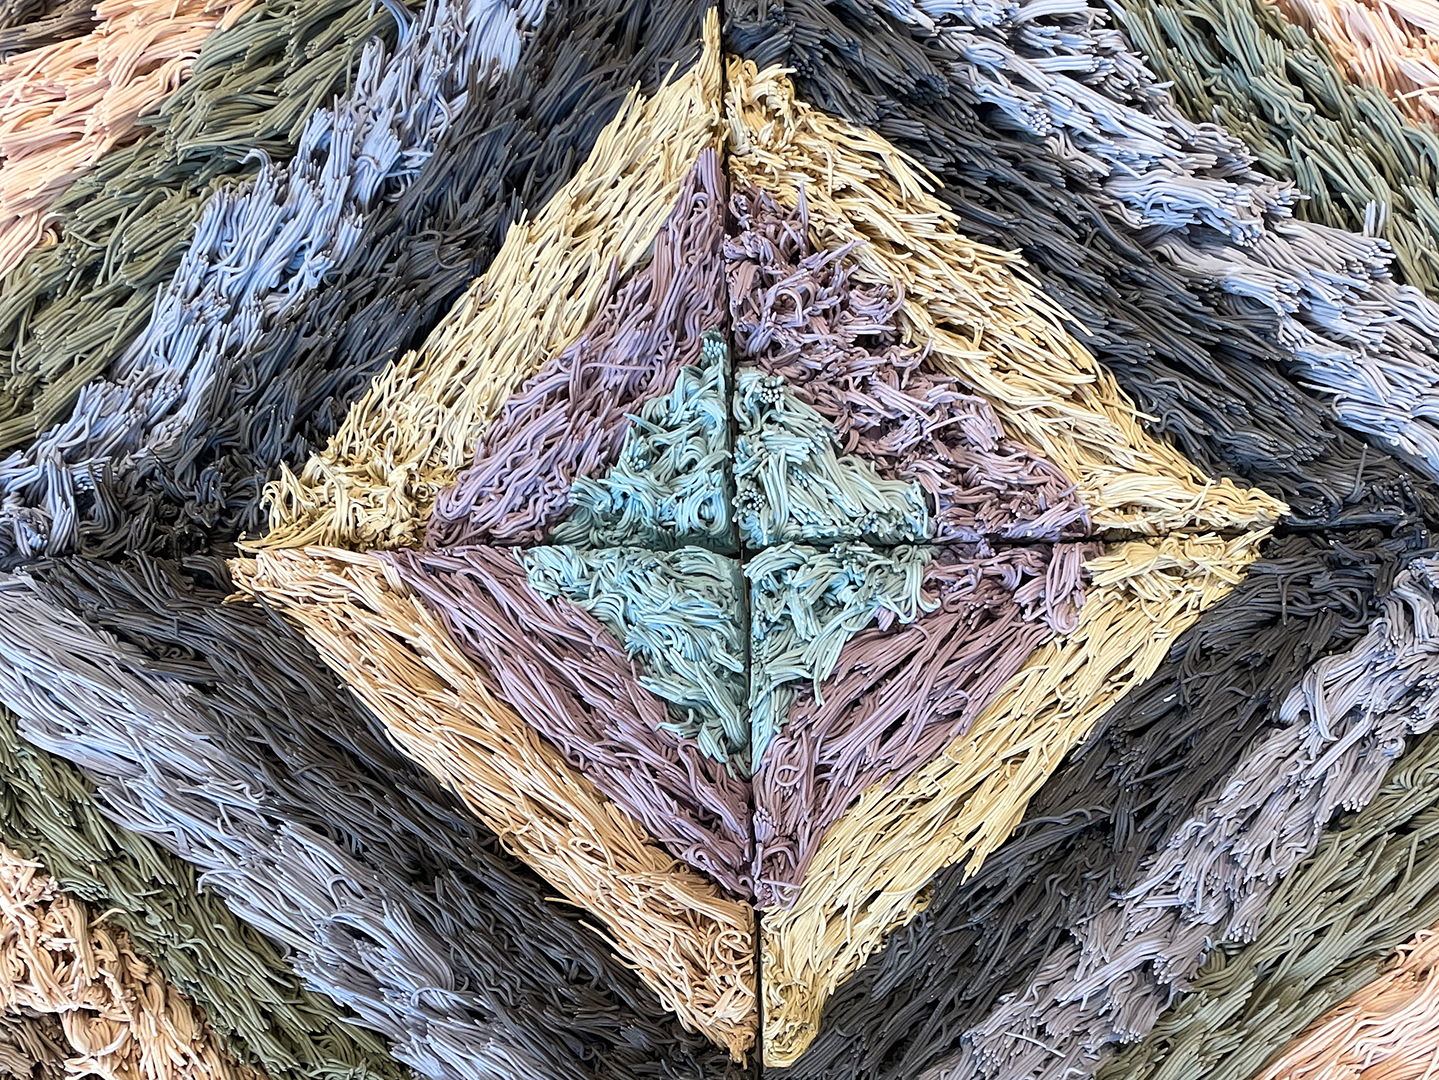 Close-up photo of a ceramic sculpture by Risa Hricovsky that looks like a pastel-colored patterned shag rug.